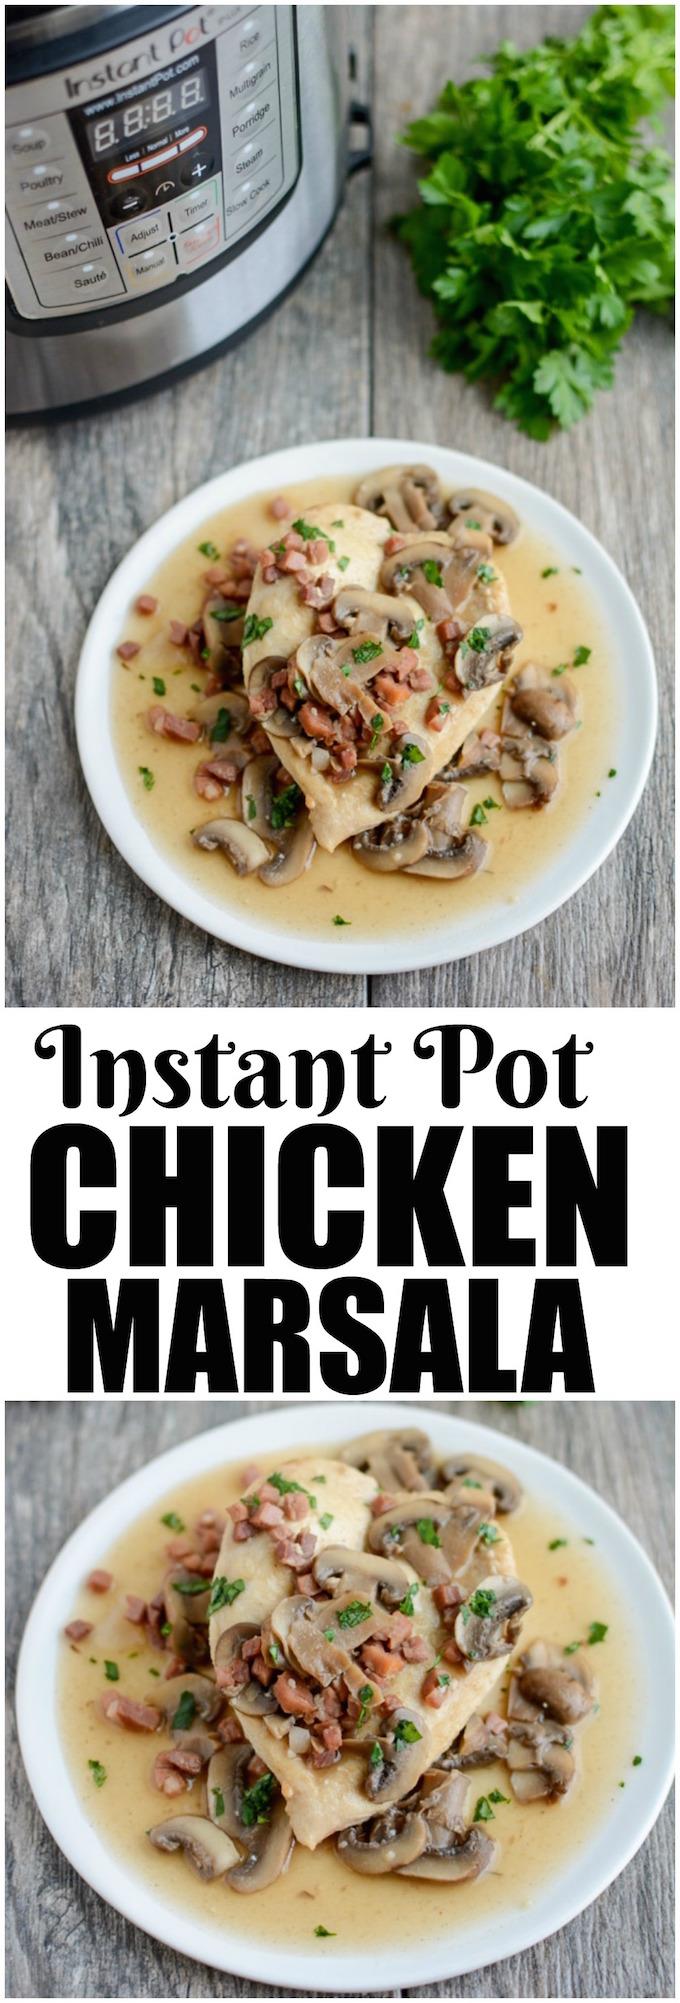 This Instant Pot Chicken Marsala is perfect for a busy weeknight dinner or a fancy date night in. It's easy to make, full of flavor and using the pressure cooker makes it even less work than the already simple stovetop version.